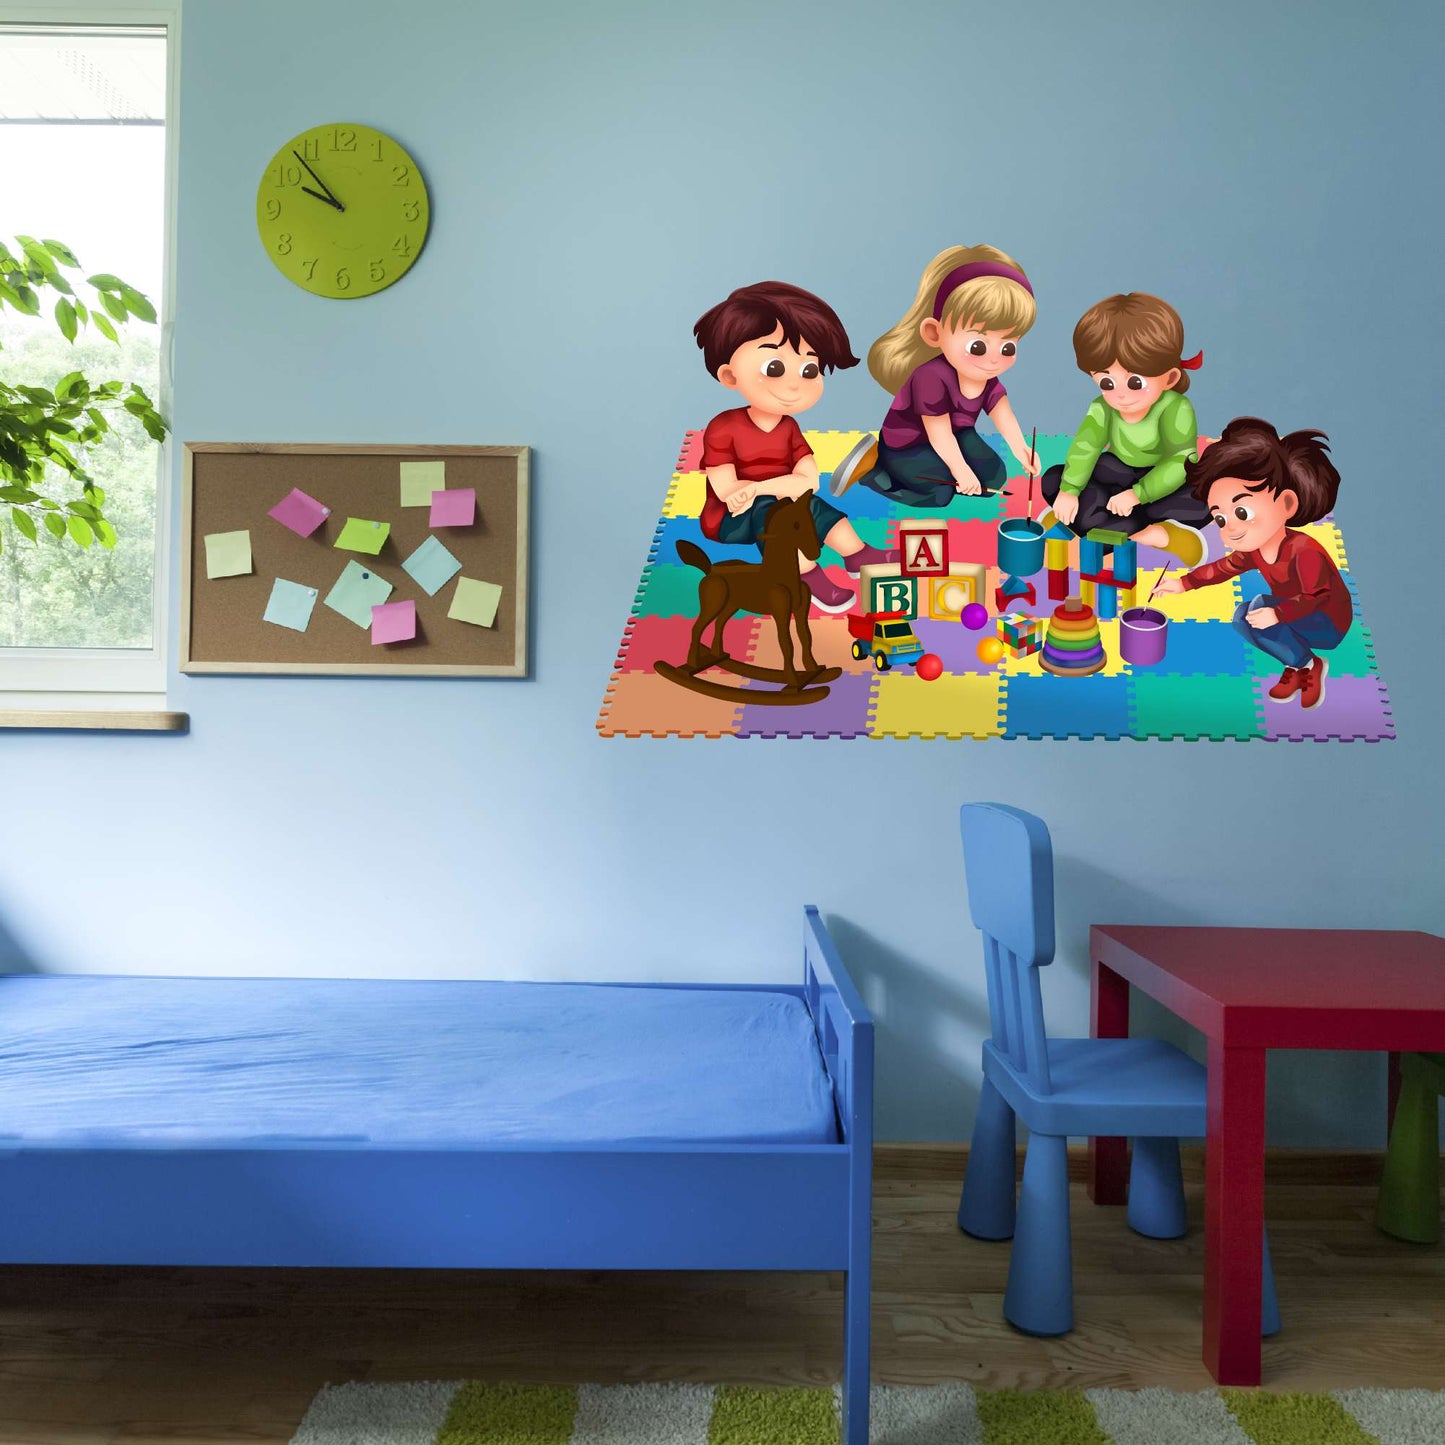 Design With Vinyl Playful Kids Wall Decal Cute Children Playing With Toys Colorful Design - Size: